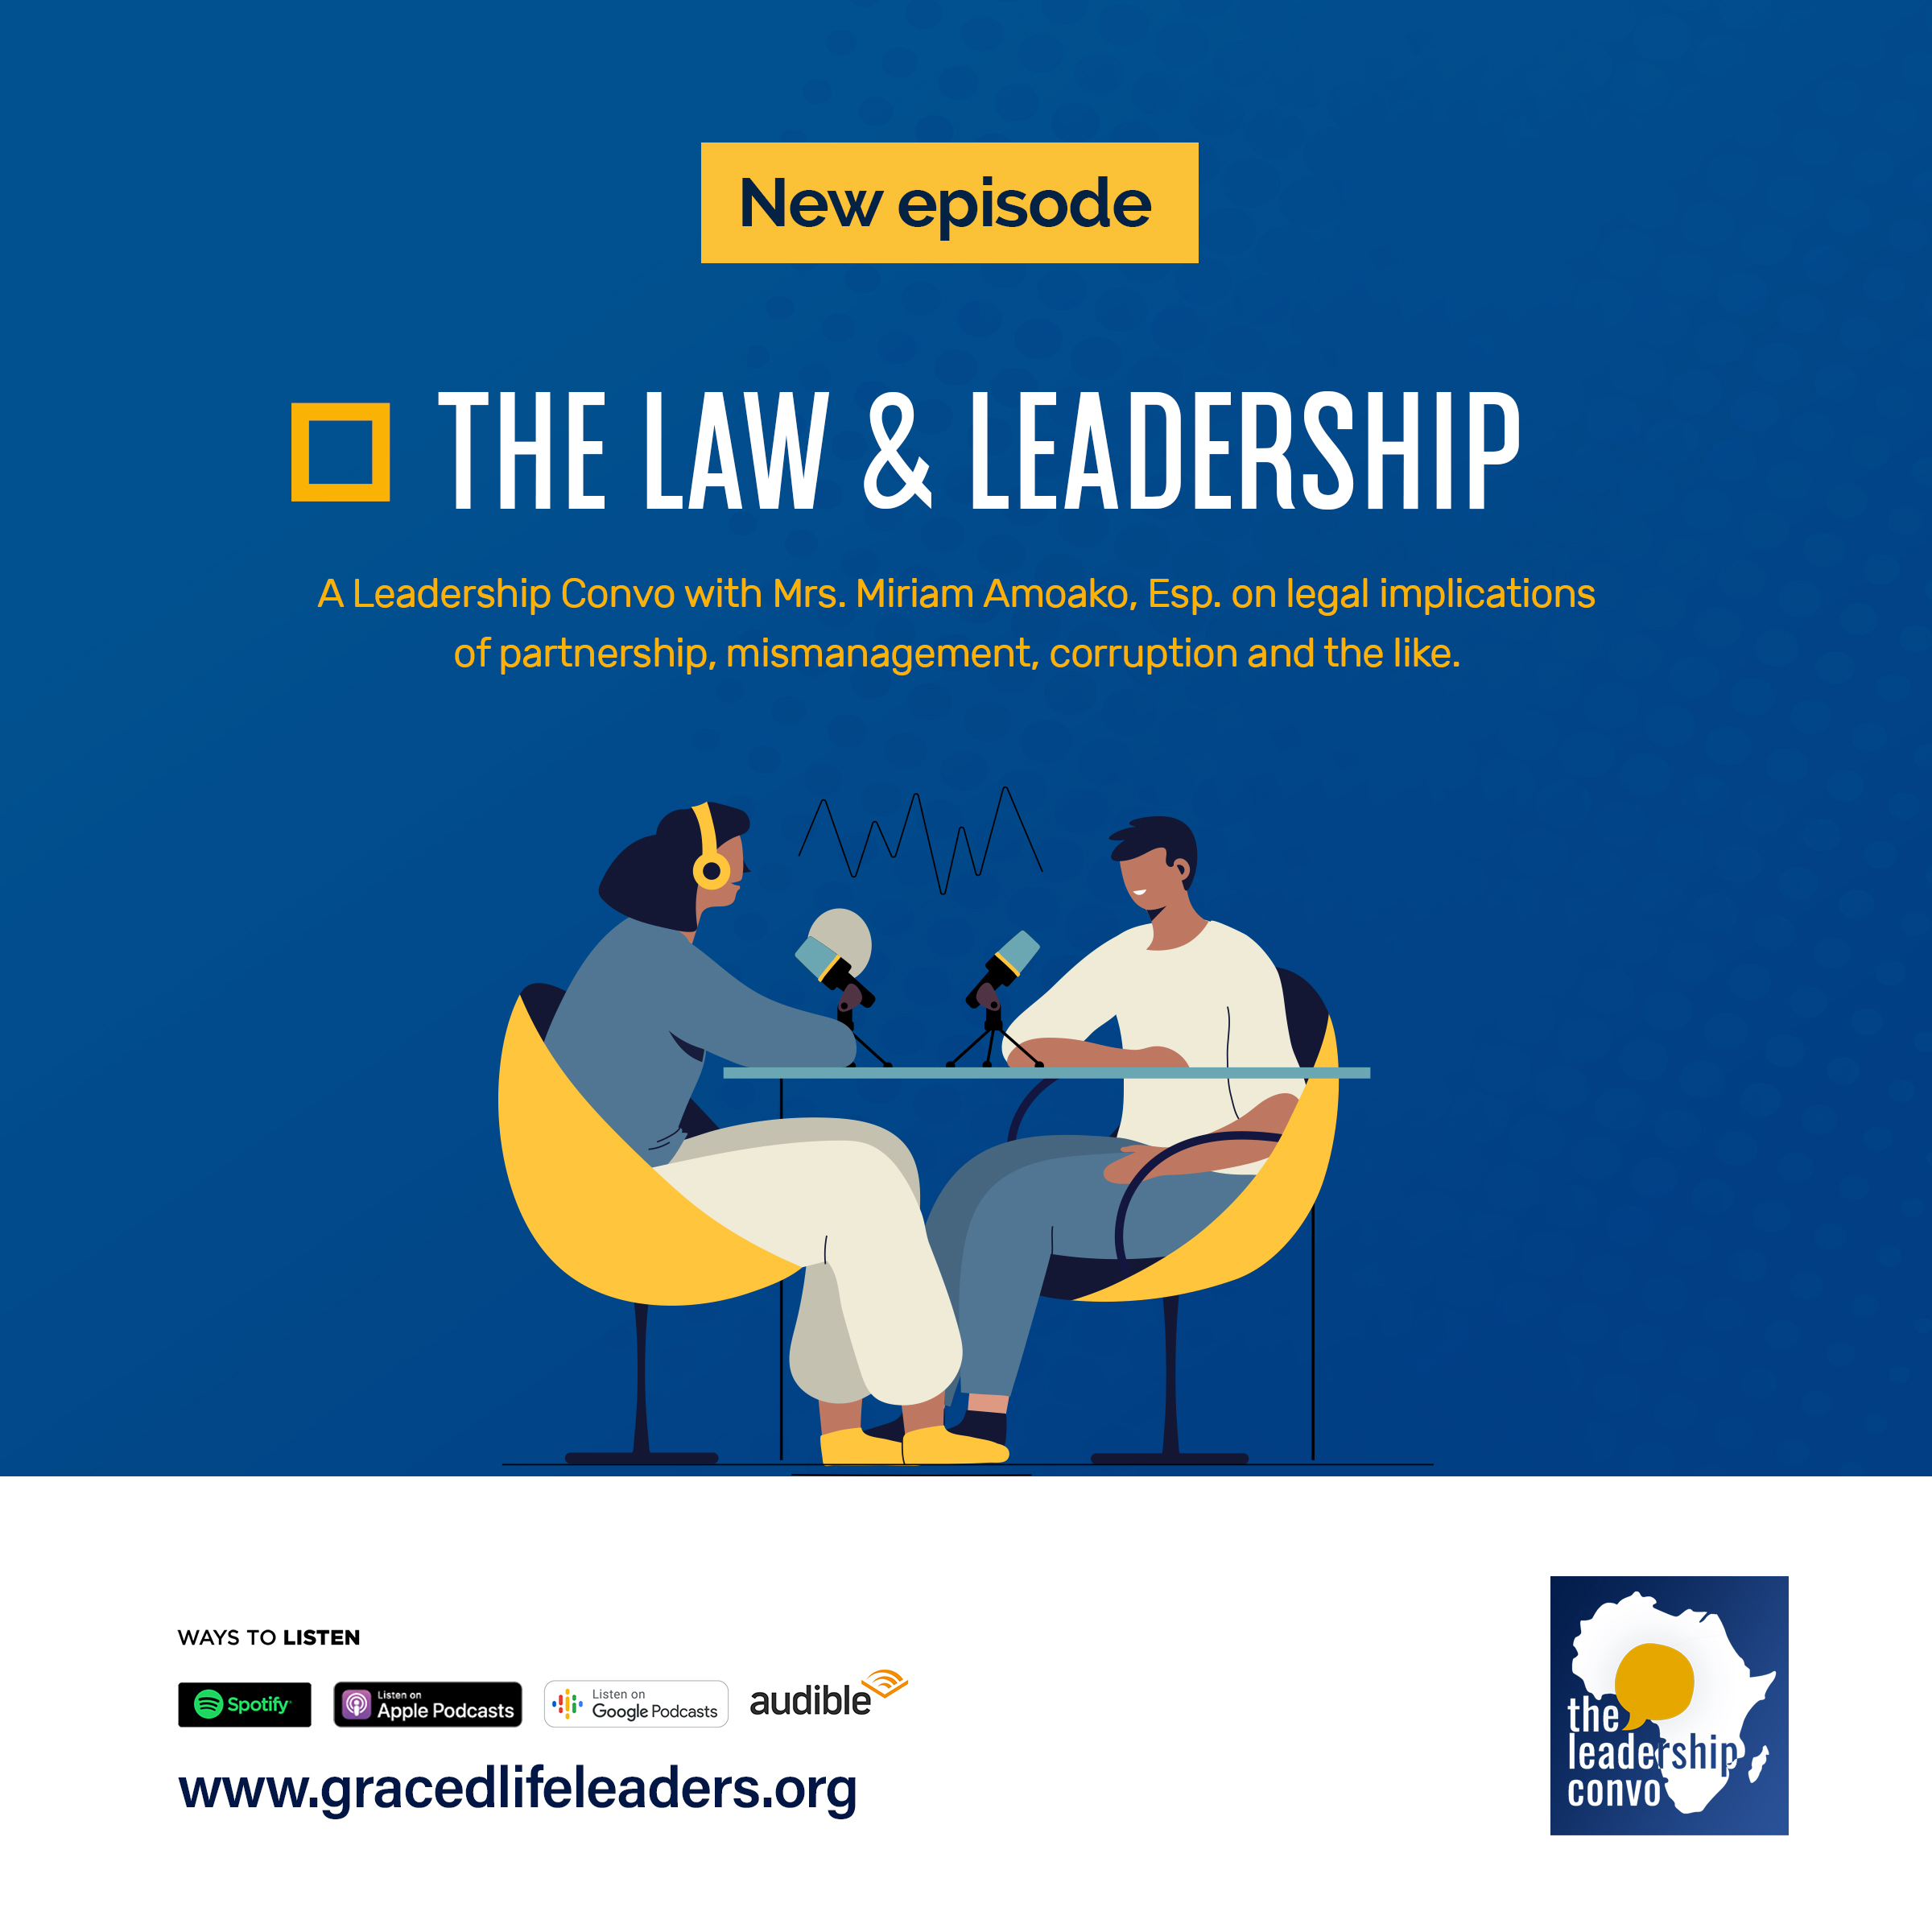 THE LAW & LEADERSHIP: LEGAL IMPLICATIONS OF PUBLIC SERVICE, CONTRACTS, CORRUPTION, ETC.